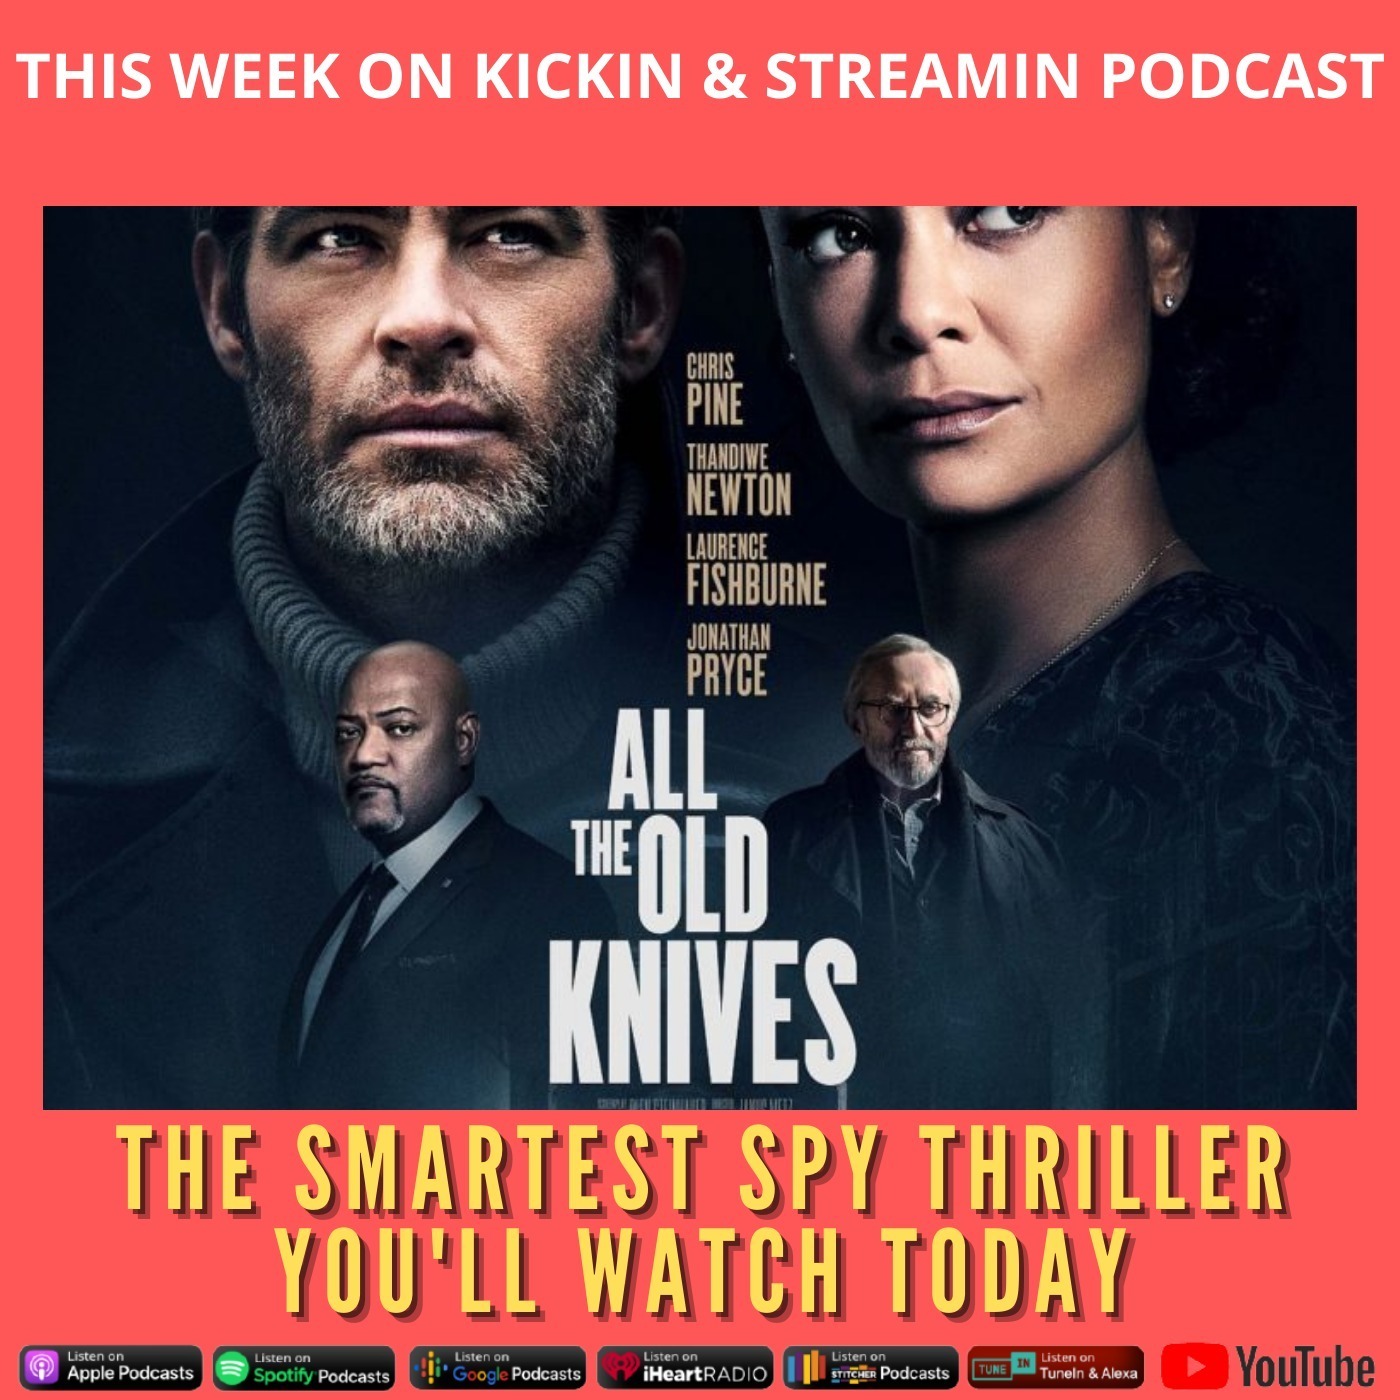 All The Old Knives: The Smartest Spy Thriller You'll Watch Today Image